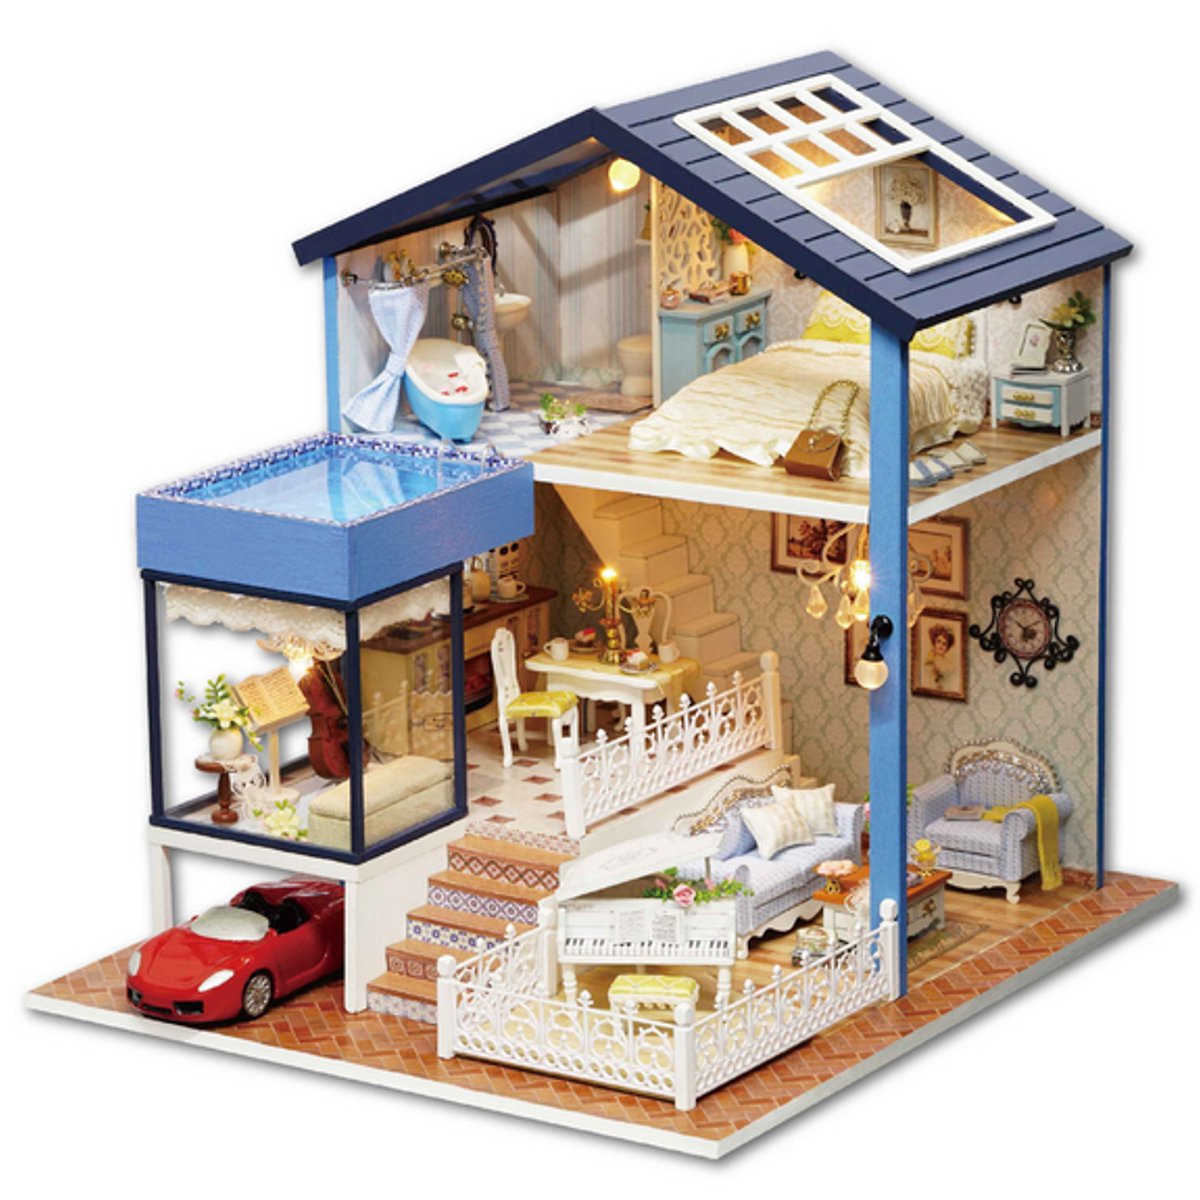 

DIY Dollhouse Miniature Kit Doll House With Furniture Gift Craft Toy